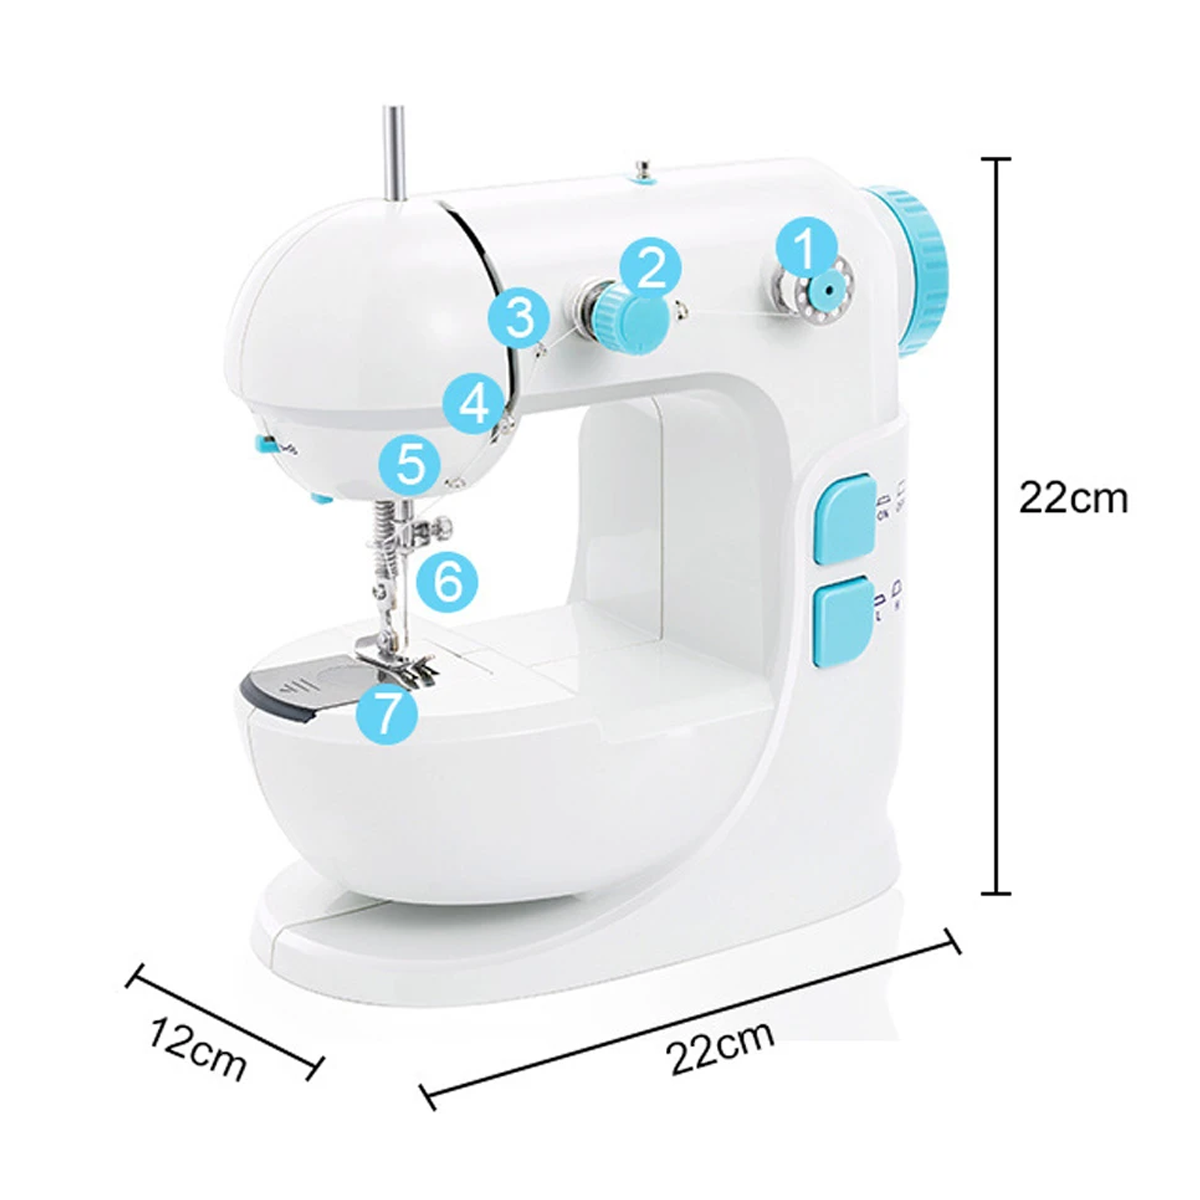 Mini Sewing Machine Household Multifunctional Speed Free-Arm Crafting Mending Machine - A